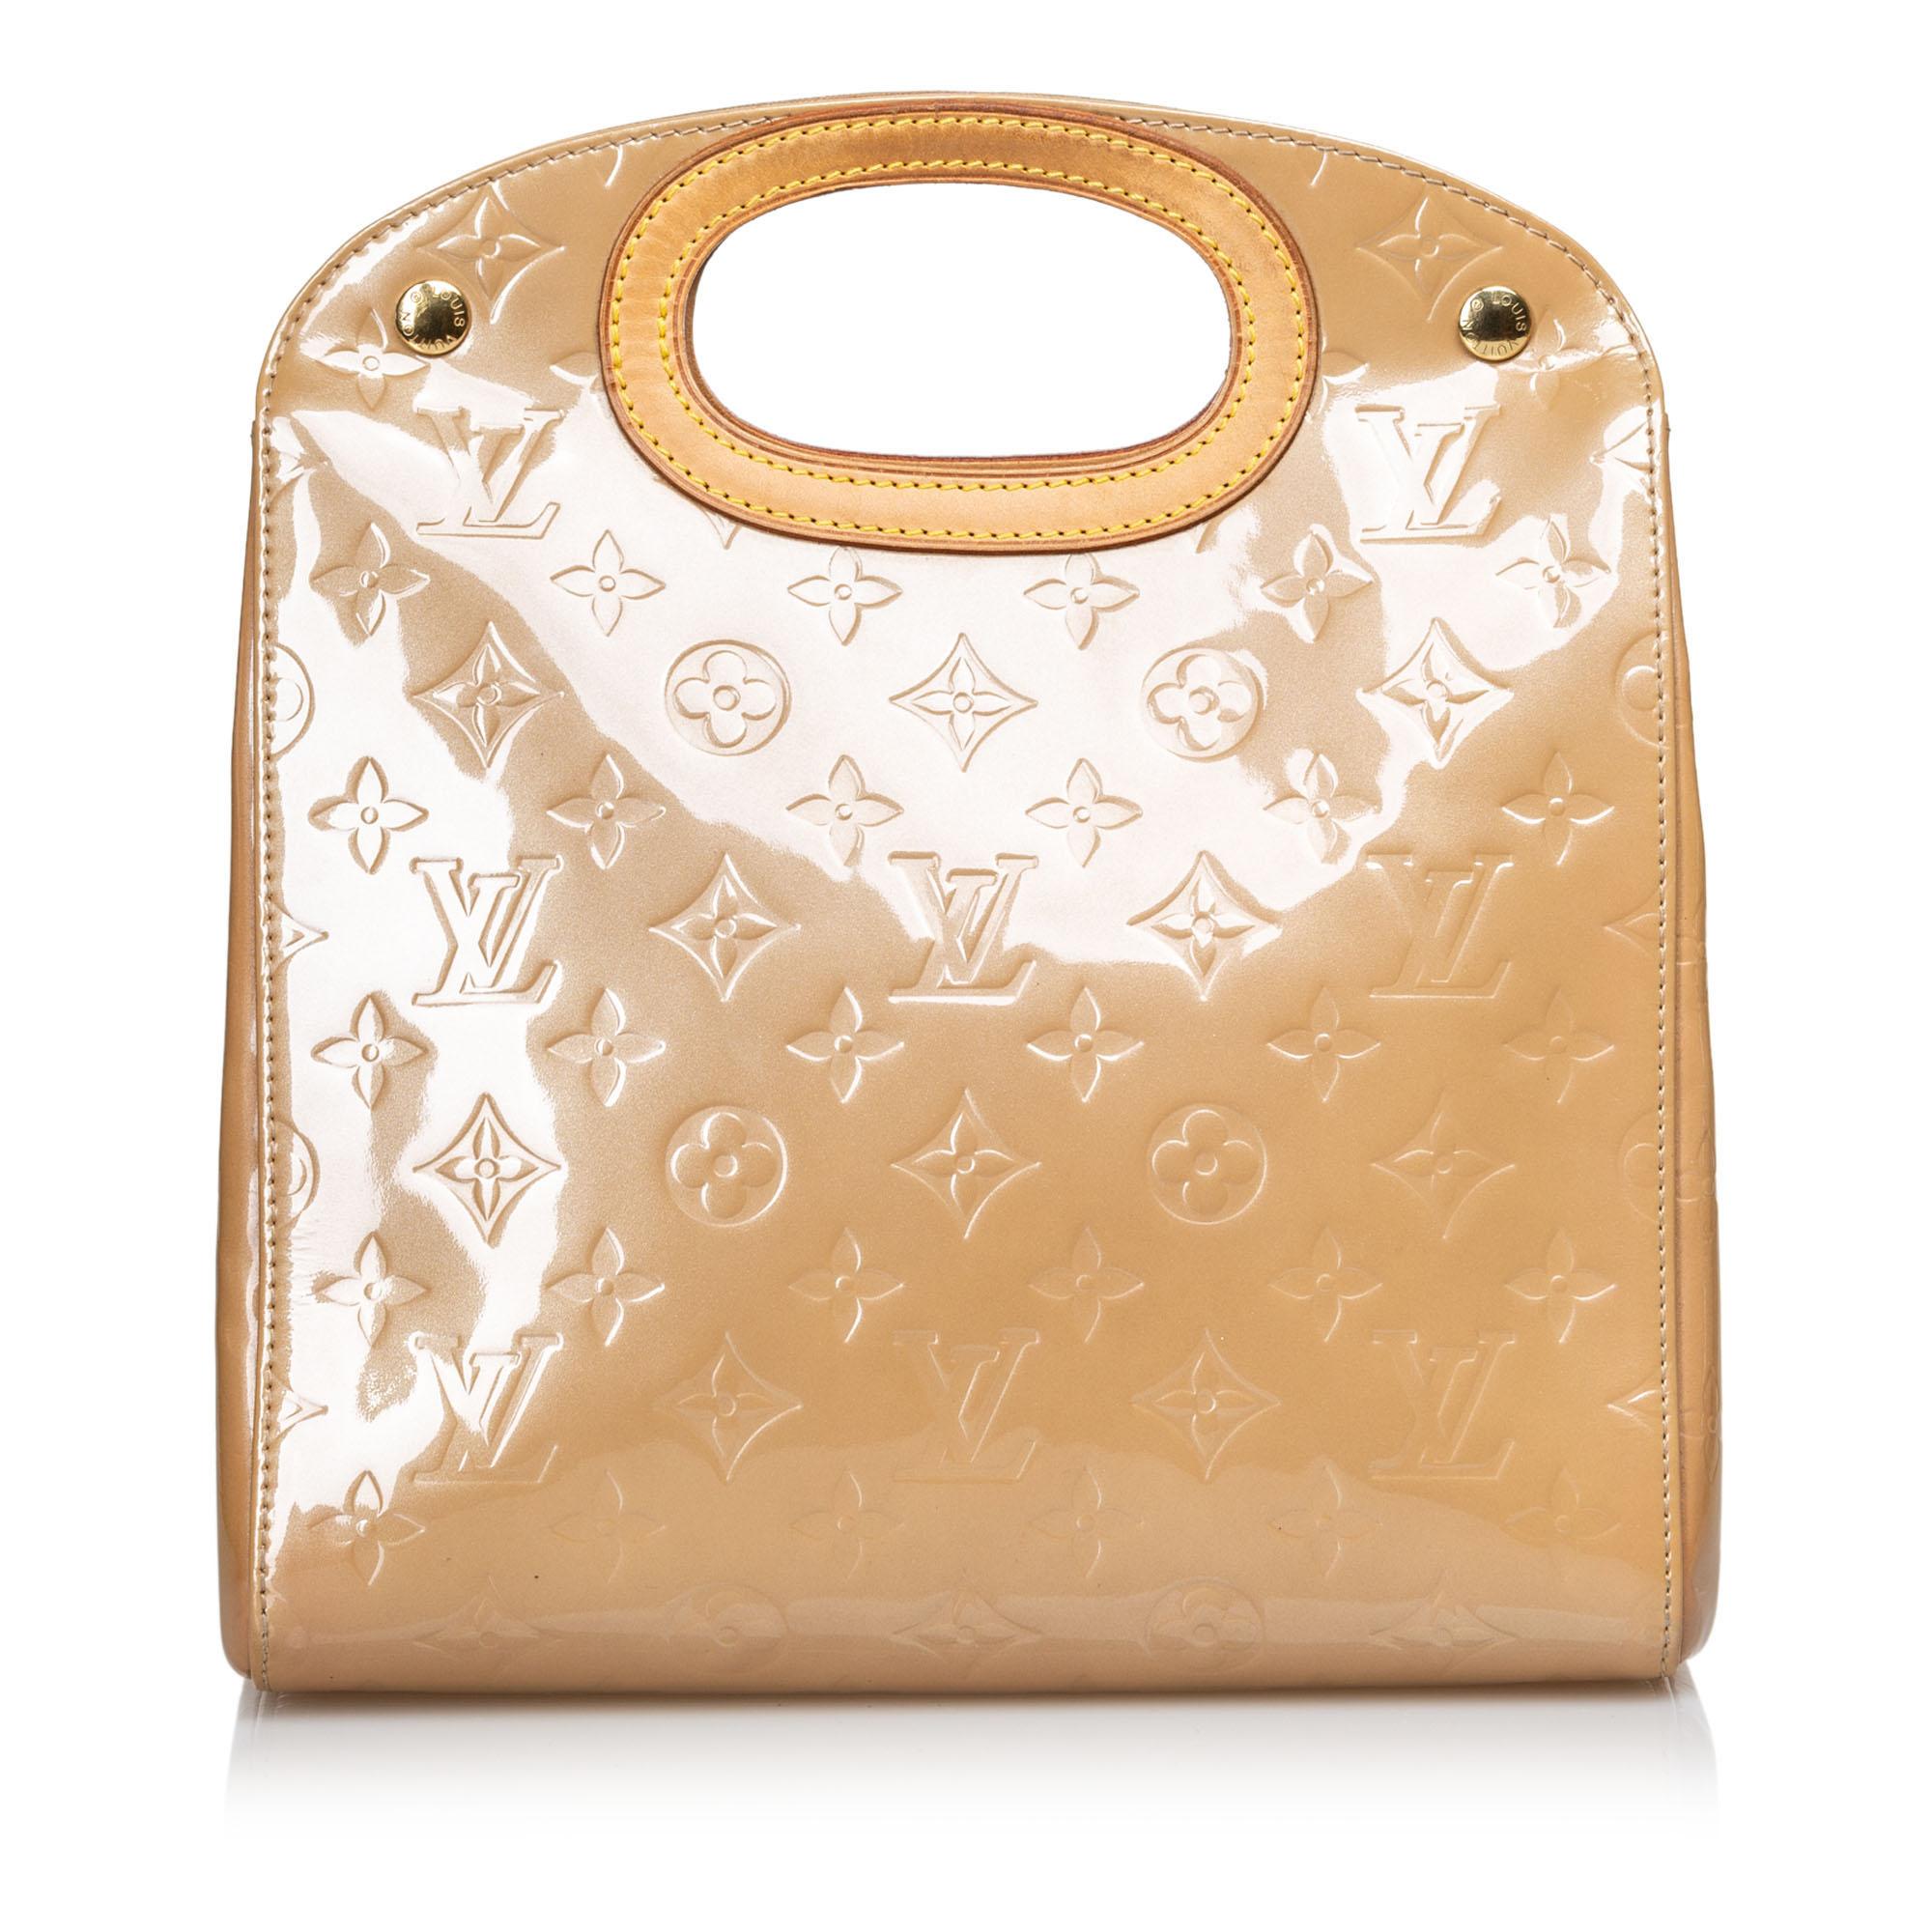 Louis Vuitton Brown Vernis Leather Leather Vernis Maple Drive Spain w/ Dust Bag In Good Condition For Sale In Orlando, FL